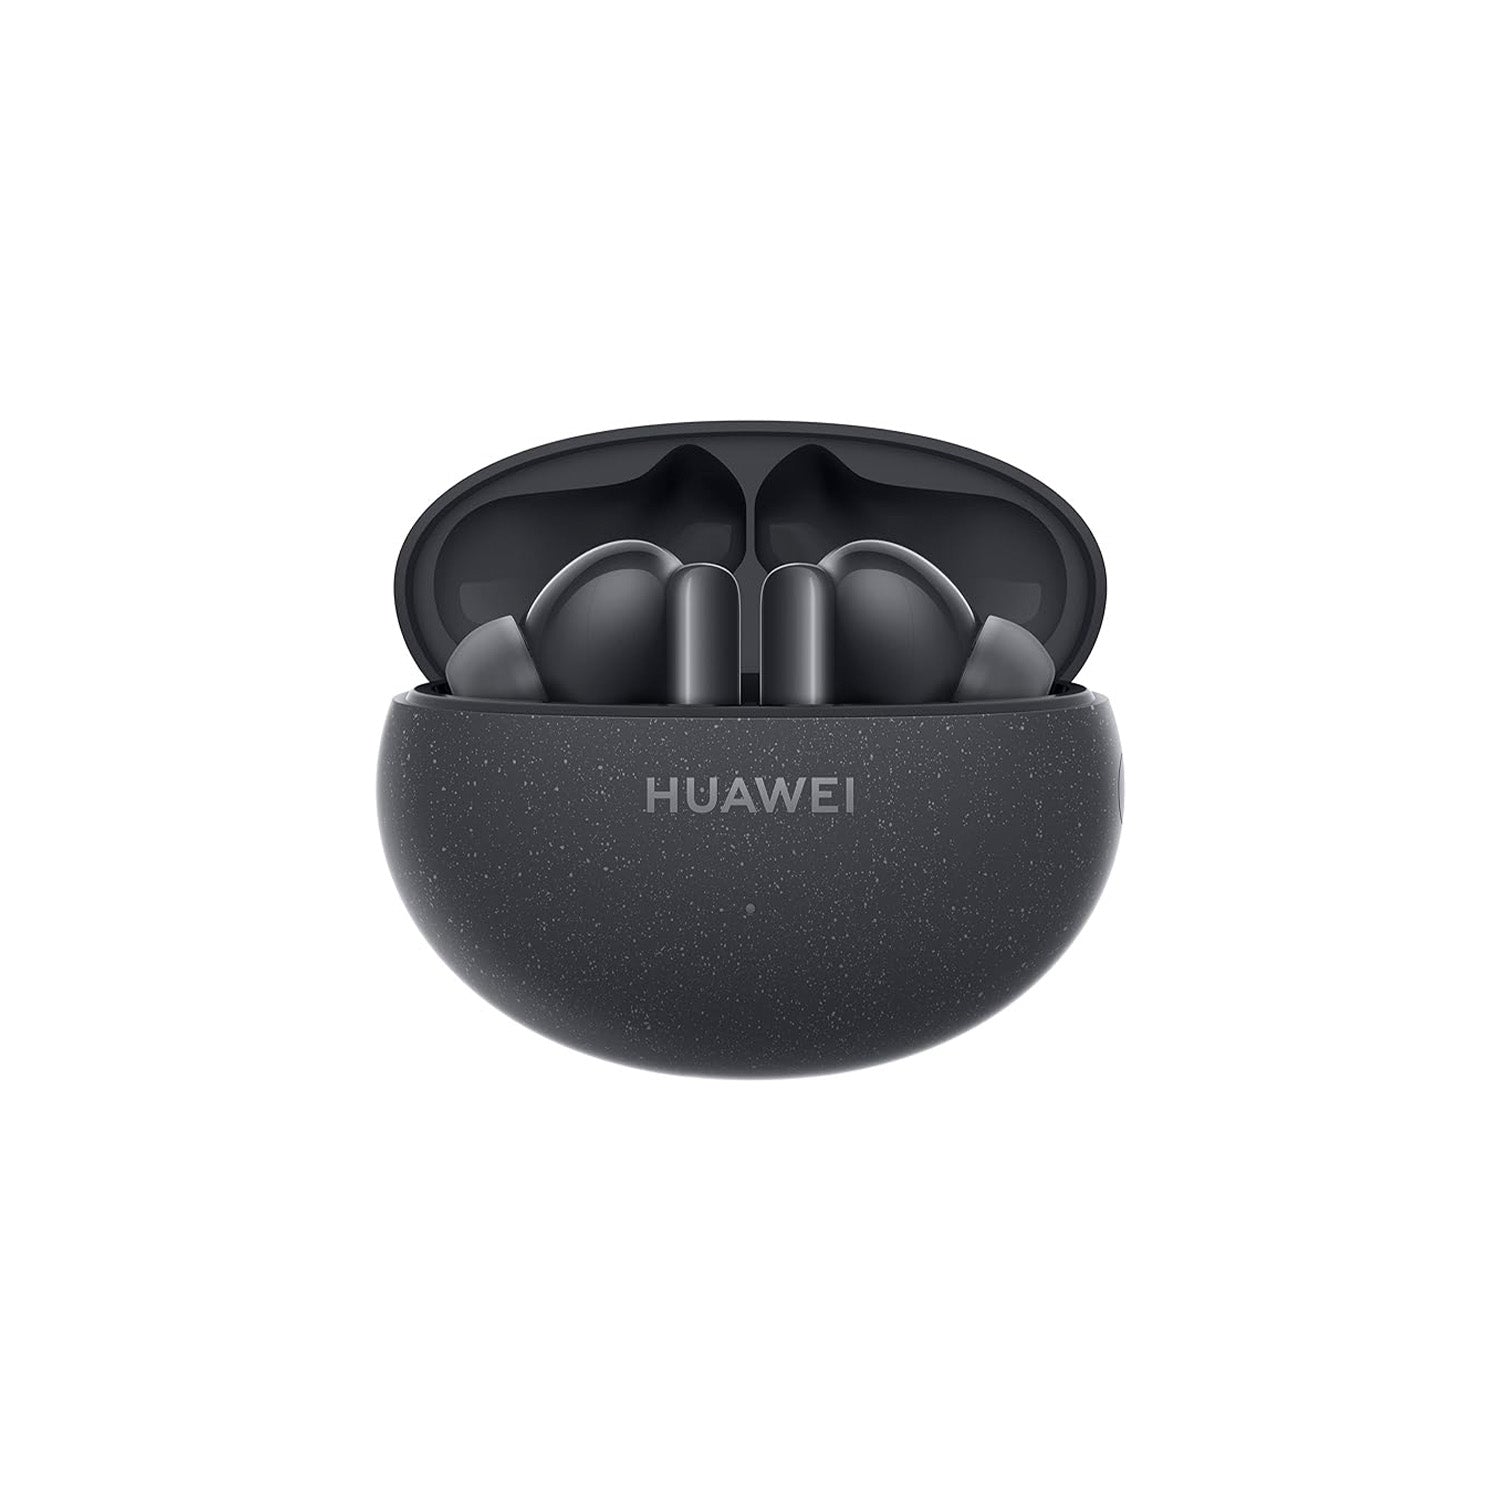 HUAWEI FreeBuds 5i Wireless Earbuds | Noise Cancelling Earphones | Long Lasting Battery Life | 10 mm dynamic driver | Bluetooth 5.2 | Water Resistant in-Ear Headphones - Nebula Black  (55036653)